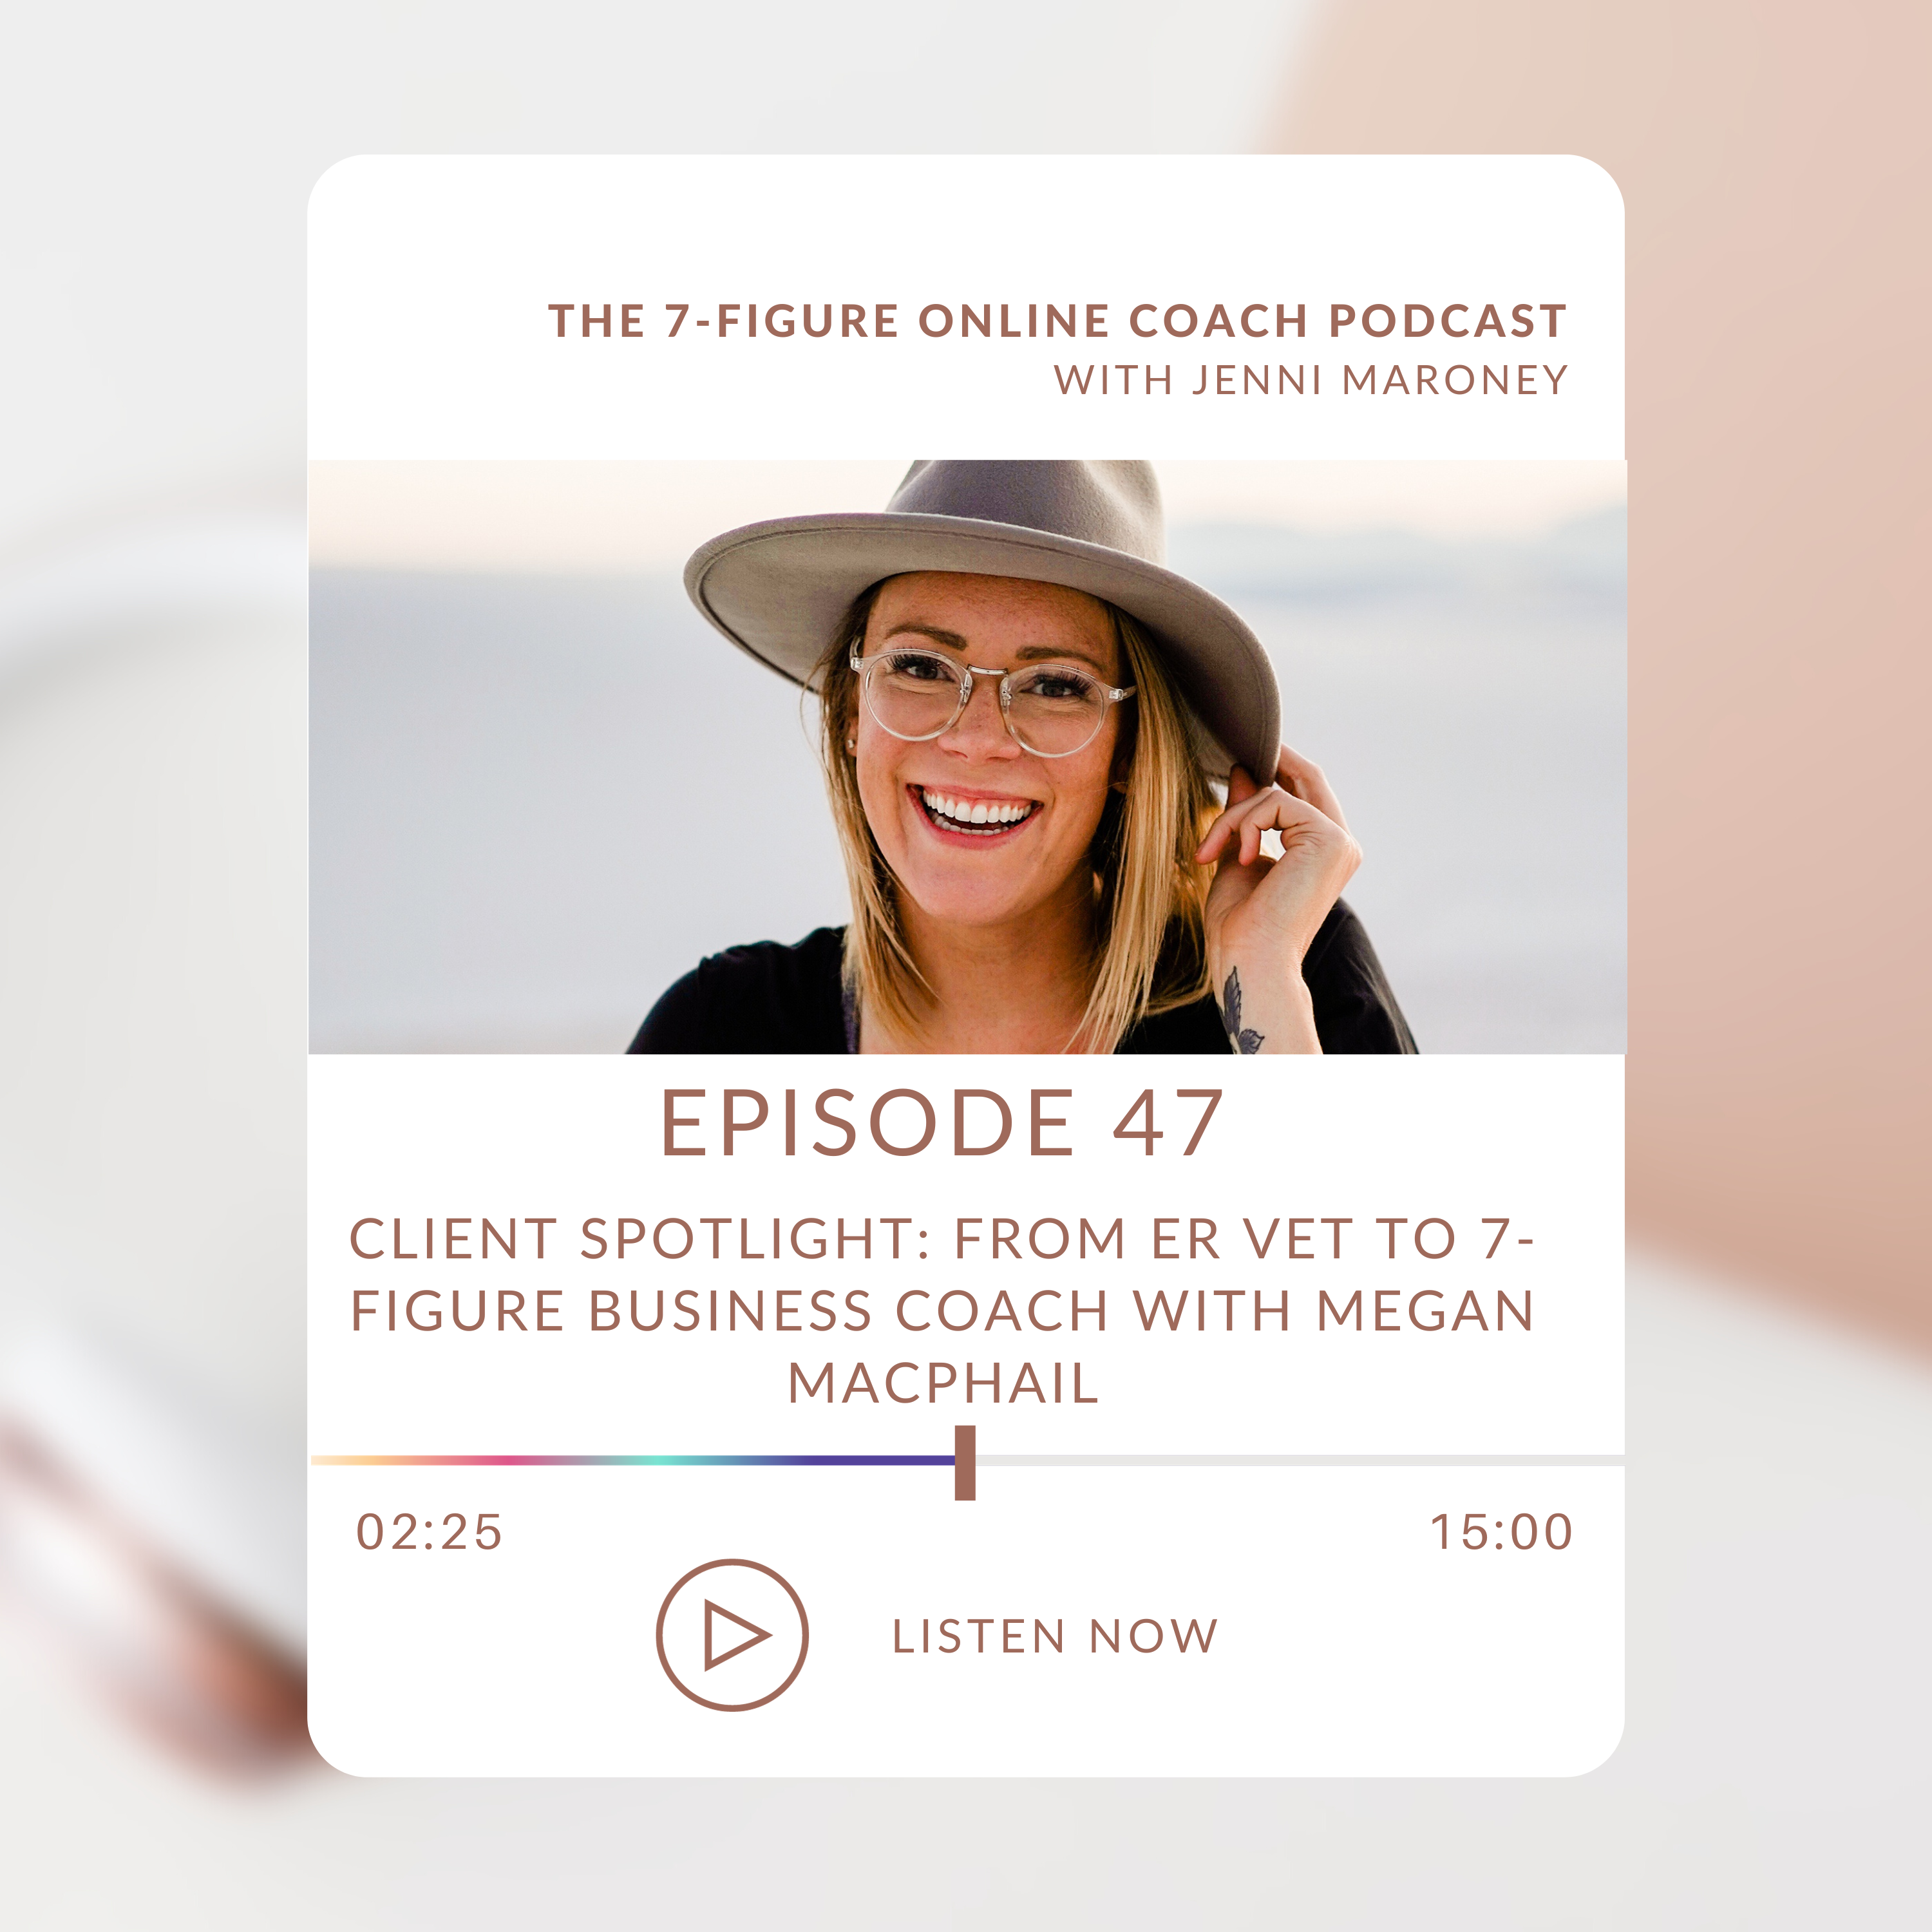 Client Spotlight: From ER Vet to 7-Figure Business Coach With Megan Macphail